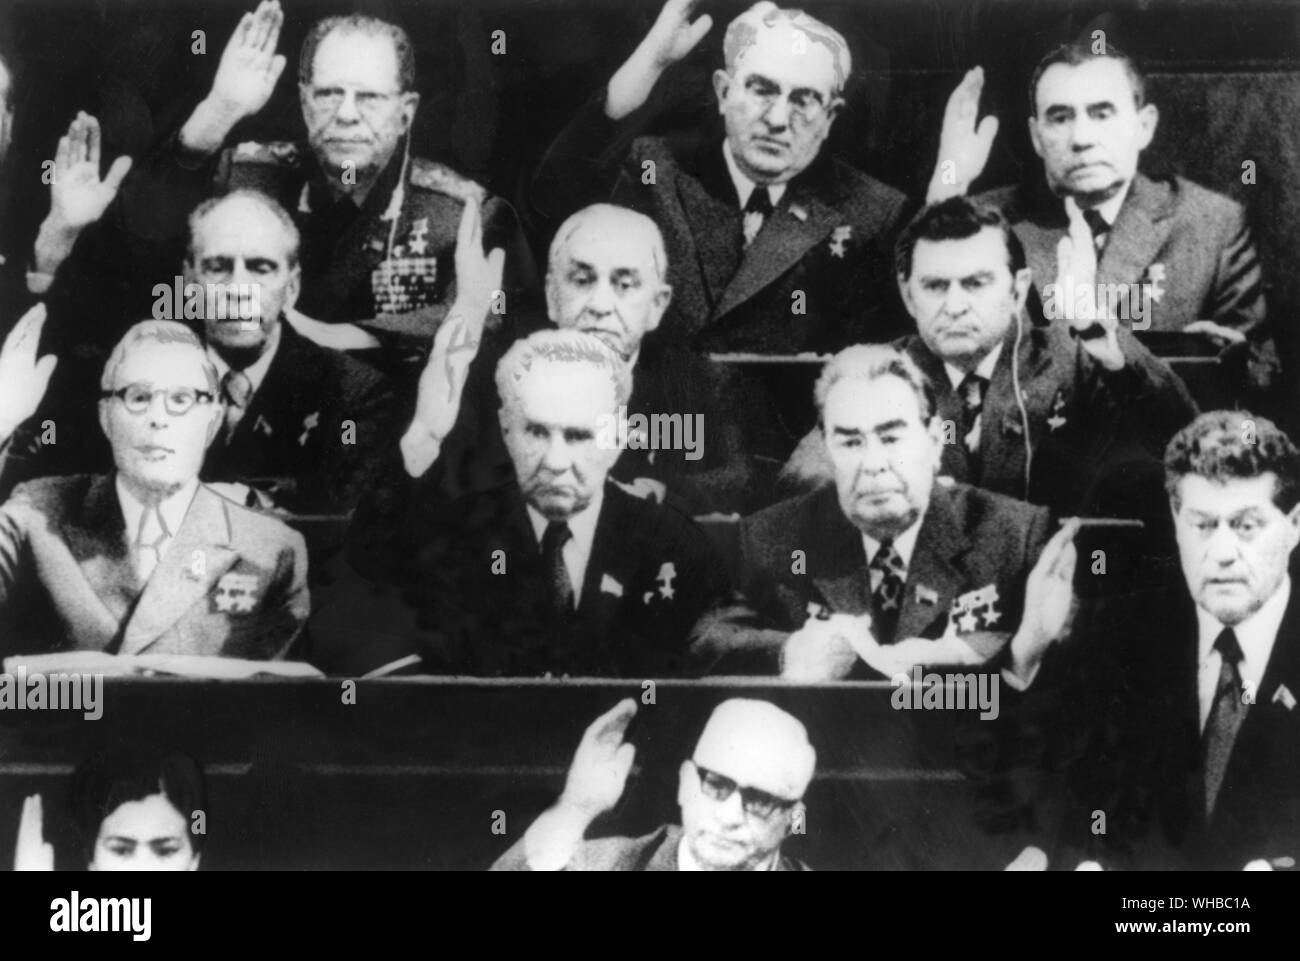 Mr. Brezhnev (second row from bottom, first on the right, only person with no hand up) sitting in Parliament in Moscow 16 June 1977 as members of the Communist Party Politburo voted for him to succeed Mr. Podgorny as president.. Leonid Ilyich Brezhnev (December 19, 1906 [O.S. December 6, 1906] - November 10, 1982) was General Secretary of the Communist Party of the Soviet Union (and thus political leader of the USSR) from 1964 to 1982, serving in that position longer than anyone other than Joseph Stalin. He was twice Chairman of the Presidium of the Supreme Soviet (head of state), from 1960 Stock Photo